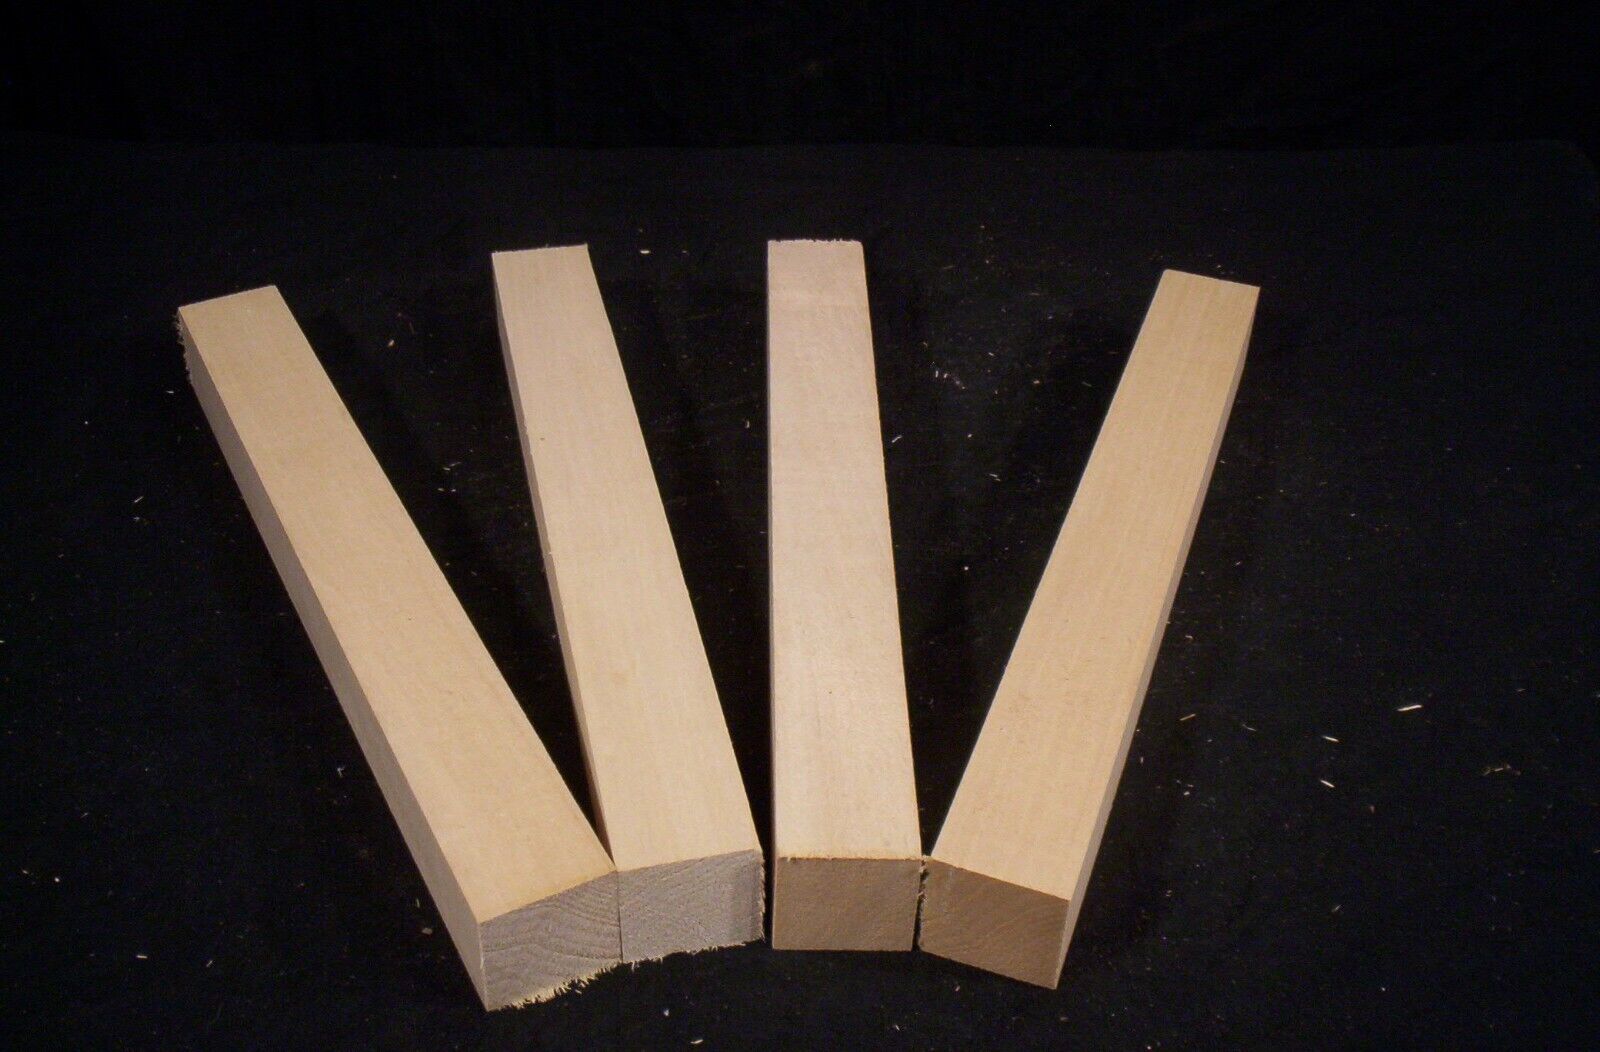 4 Piece Basswood Carving Blanks 1 1/2 X 1 1/2 X 12" Craft Hobby Lumber